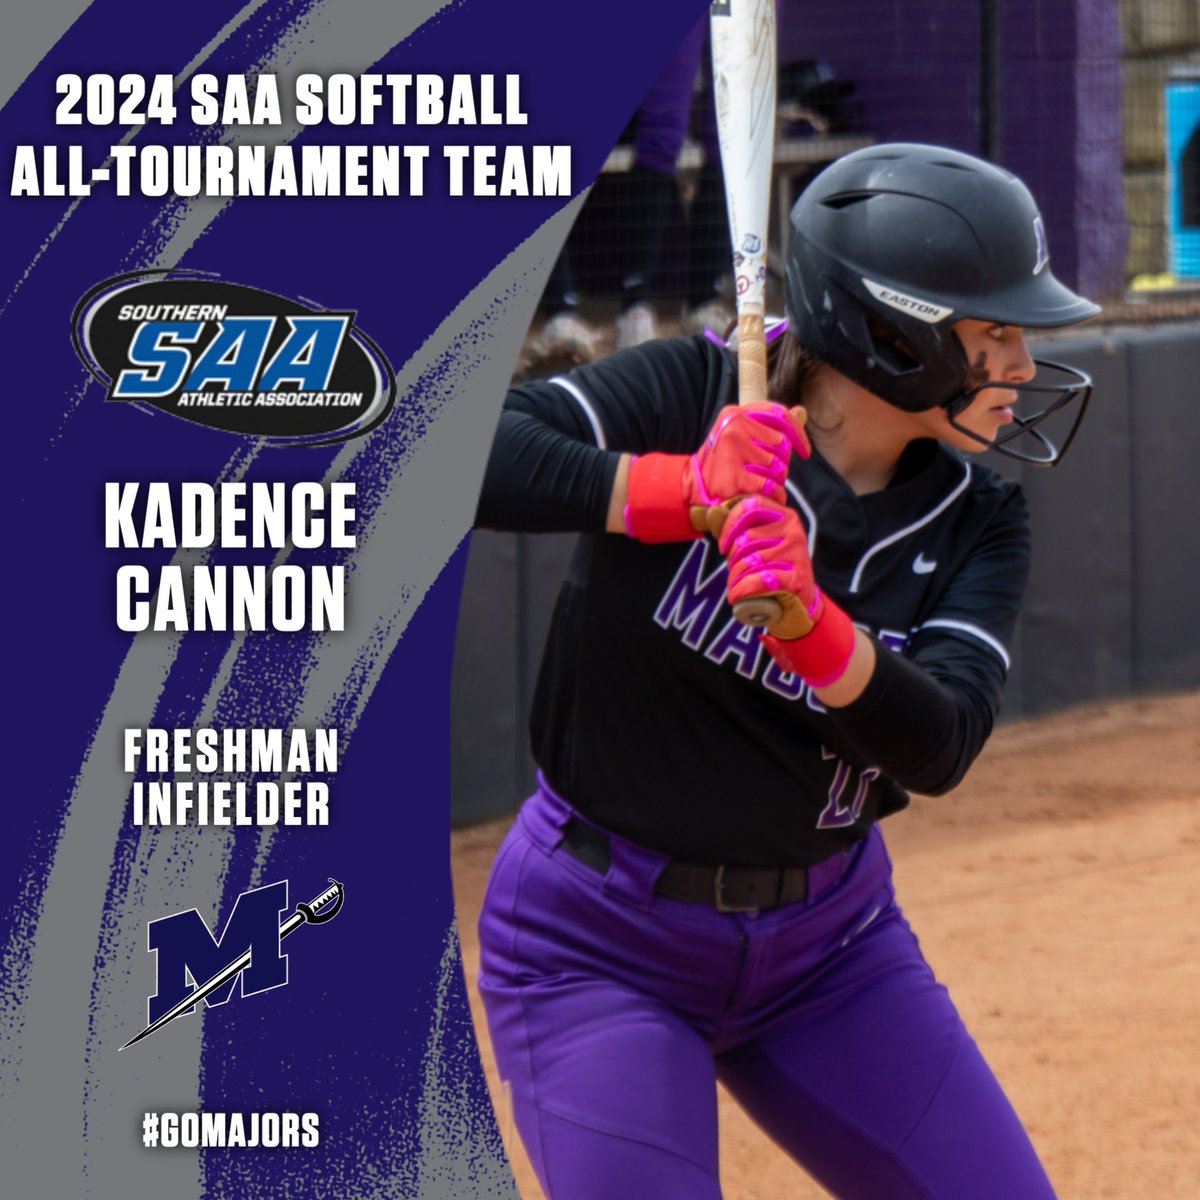 Congratulations to Kadence Cannon on being named to the 2024 SAA Softball All-Tournament Team! 💪🙌

#GoMajors